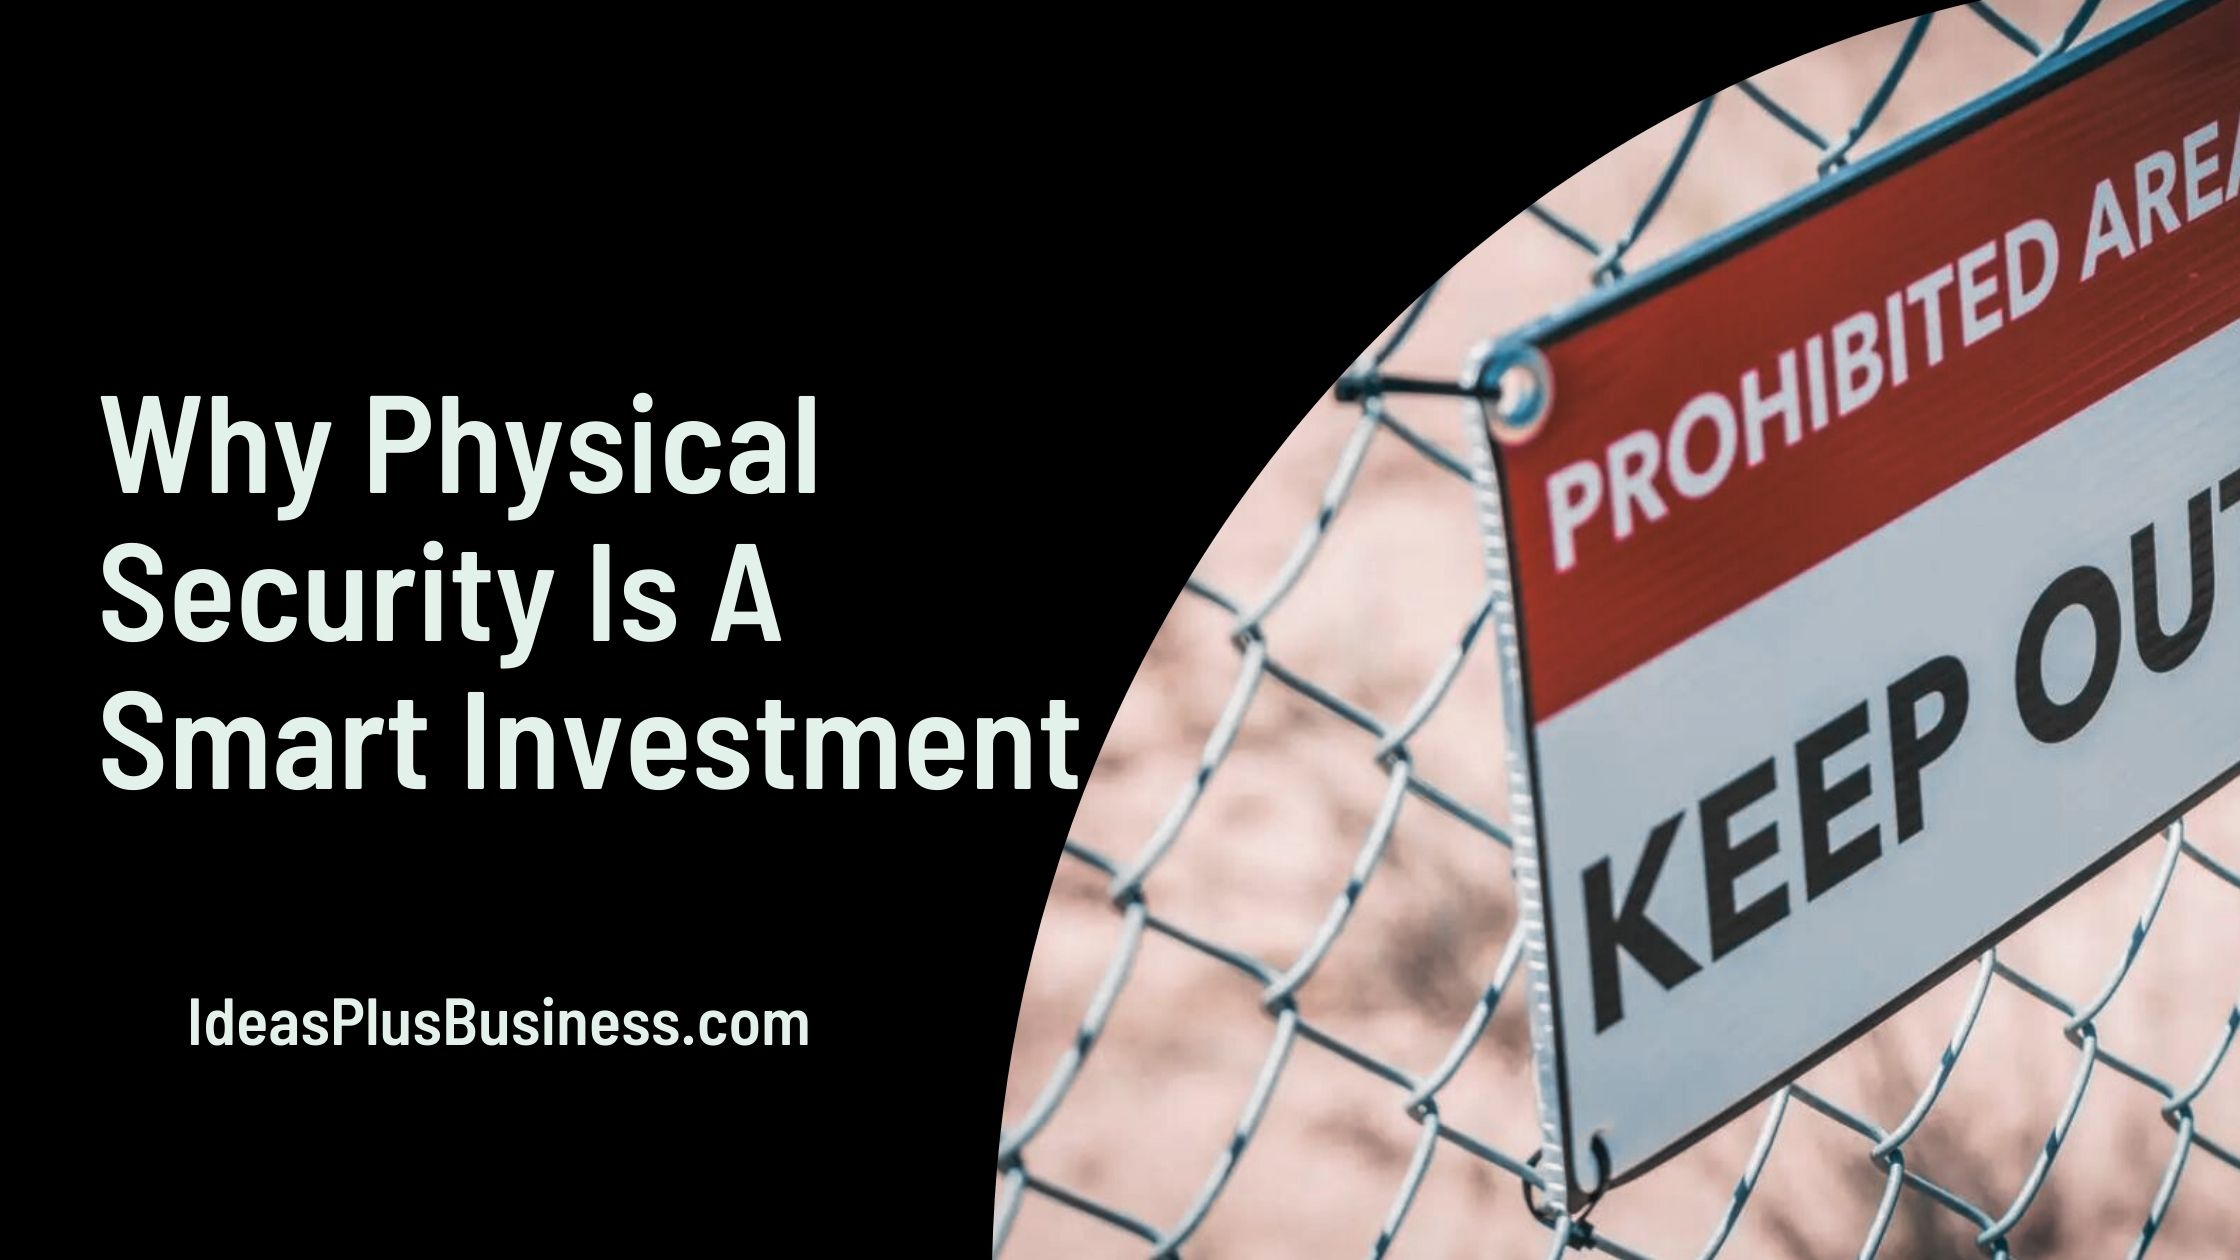 Why Physical Security Is A Smart Investment For Small Businesses